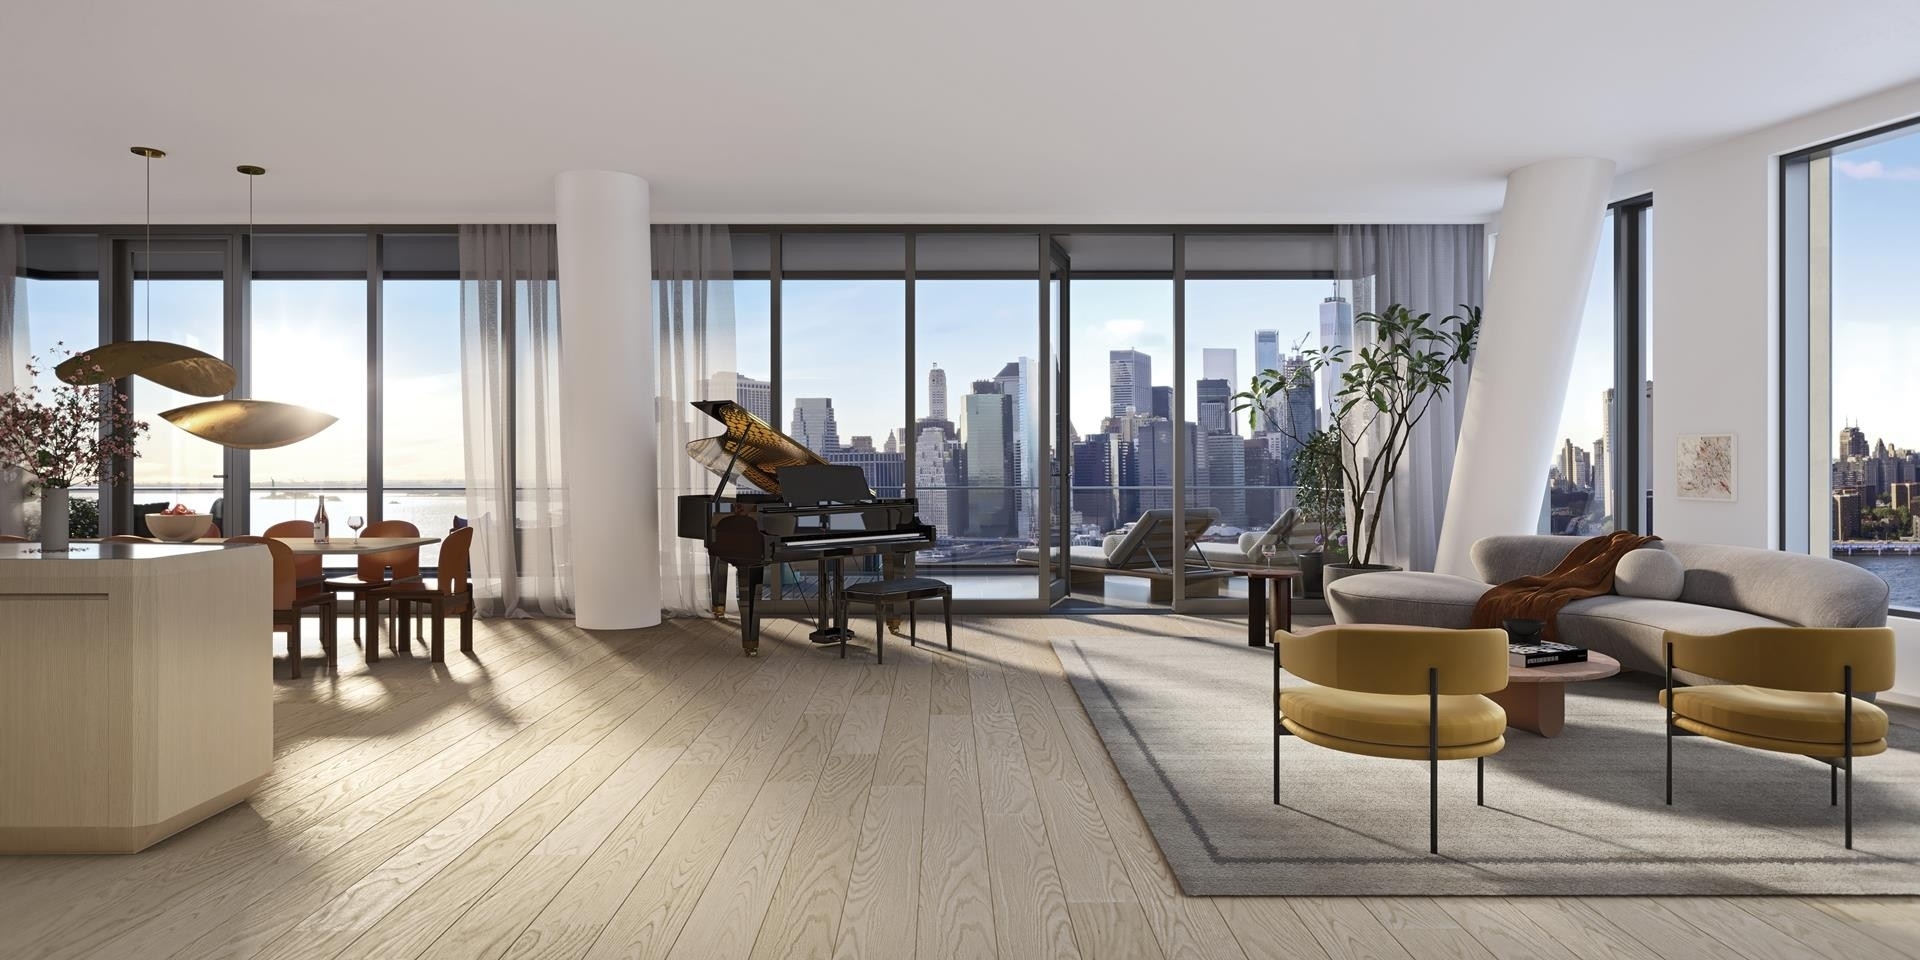 Condominium for Sale at Olympia Dumbo, 30 FRONT ST, 17A Brooklyn, New York 11201